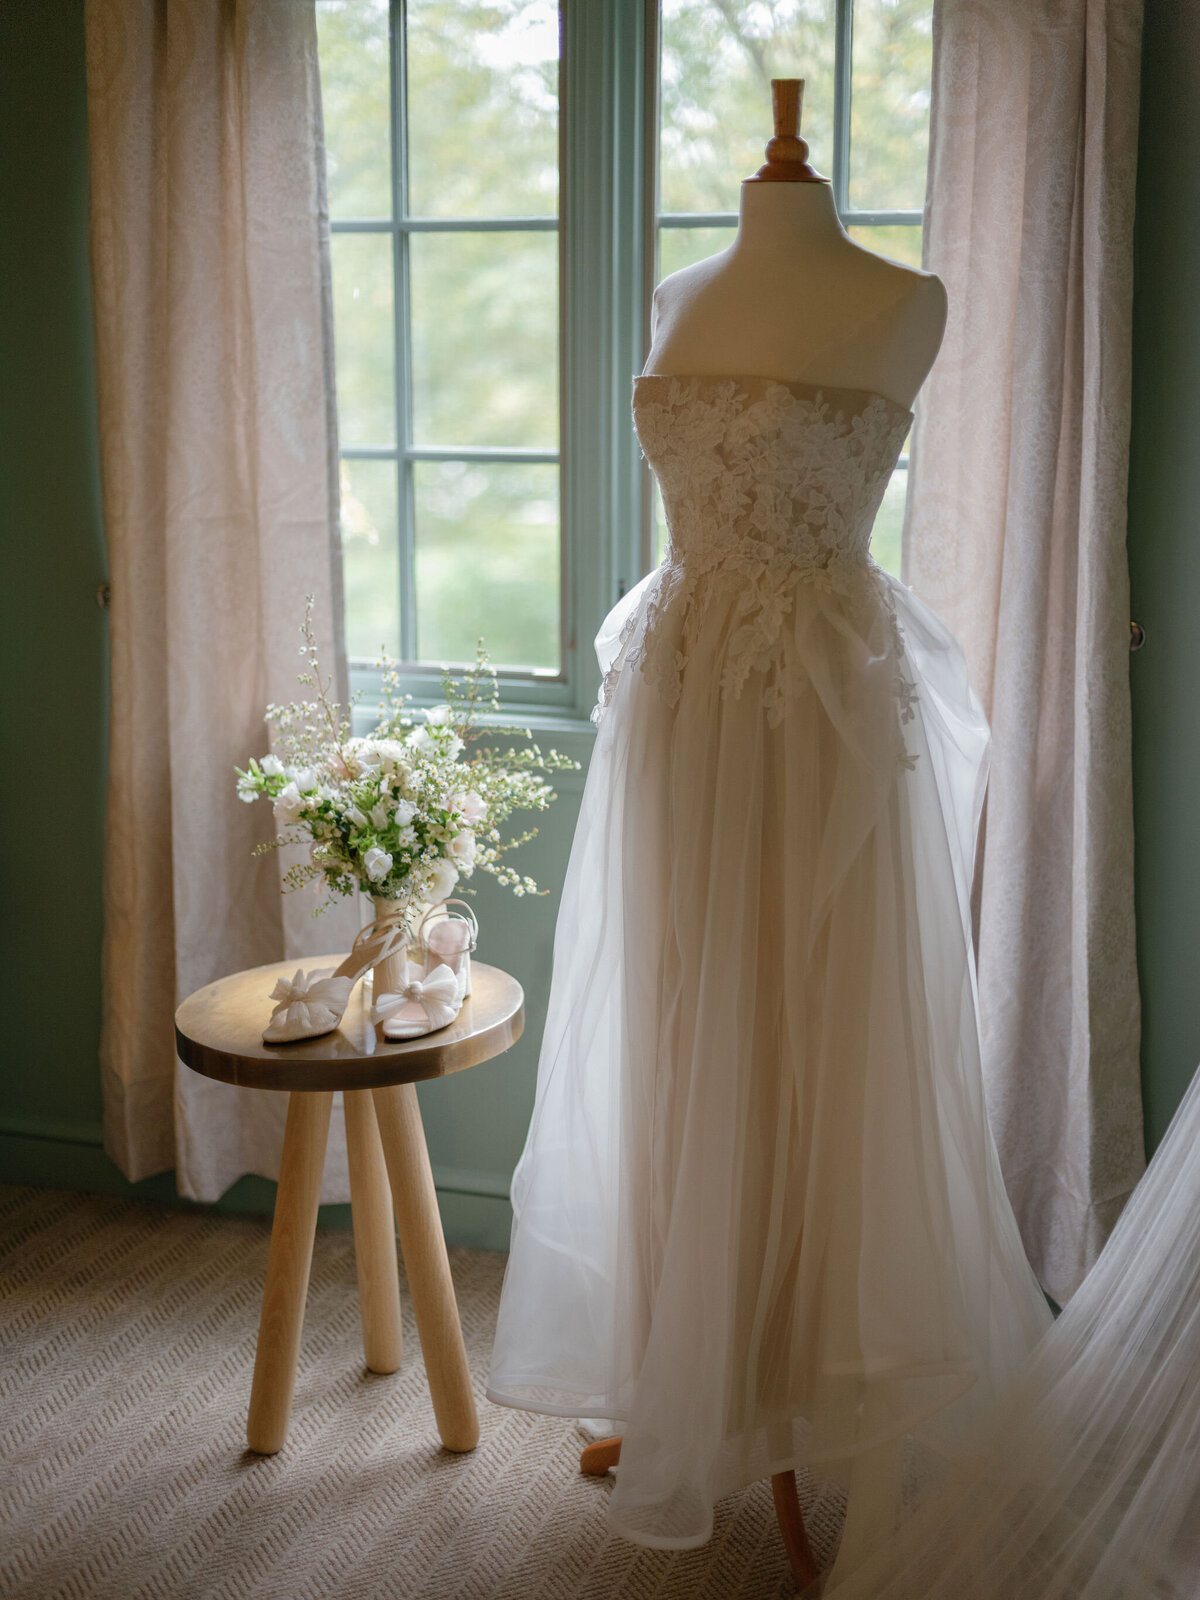 Wedding Gown with Bridal Bouquet